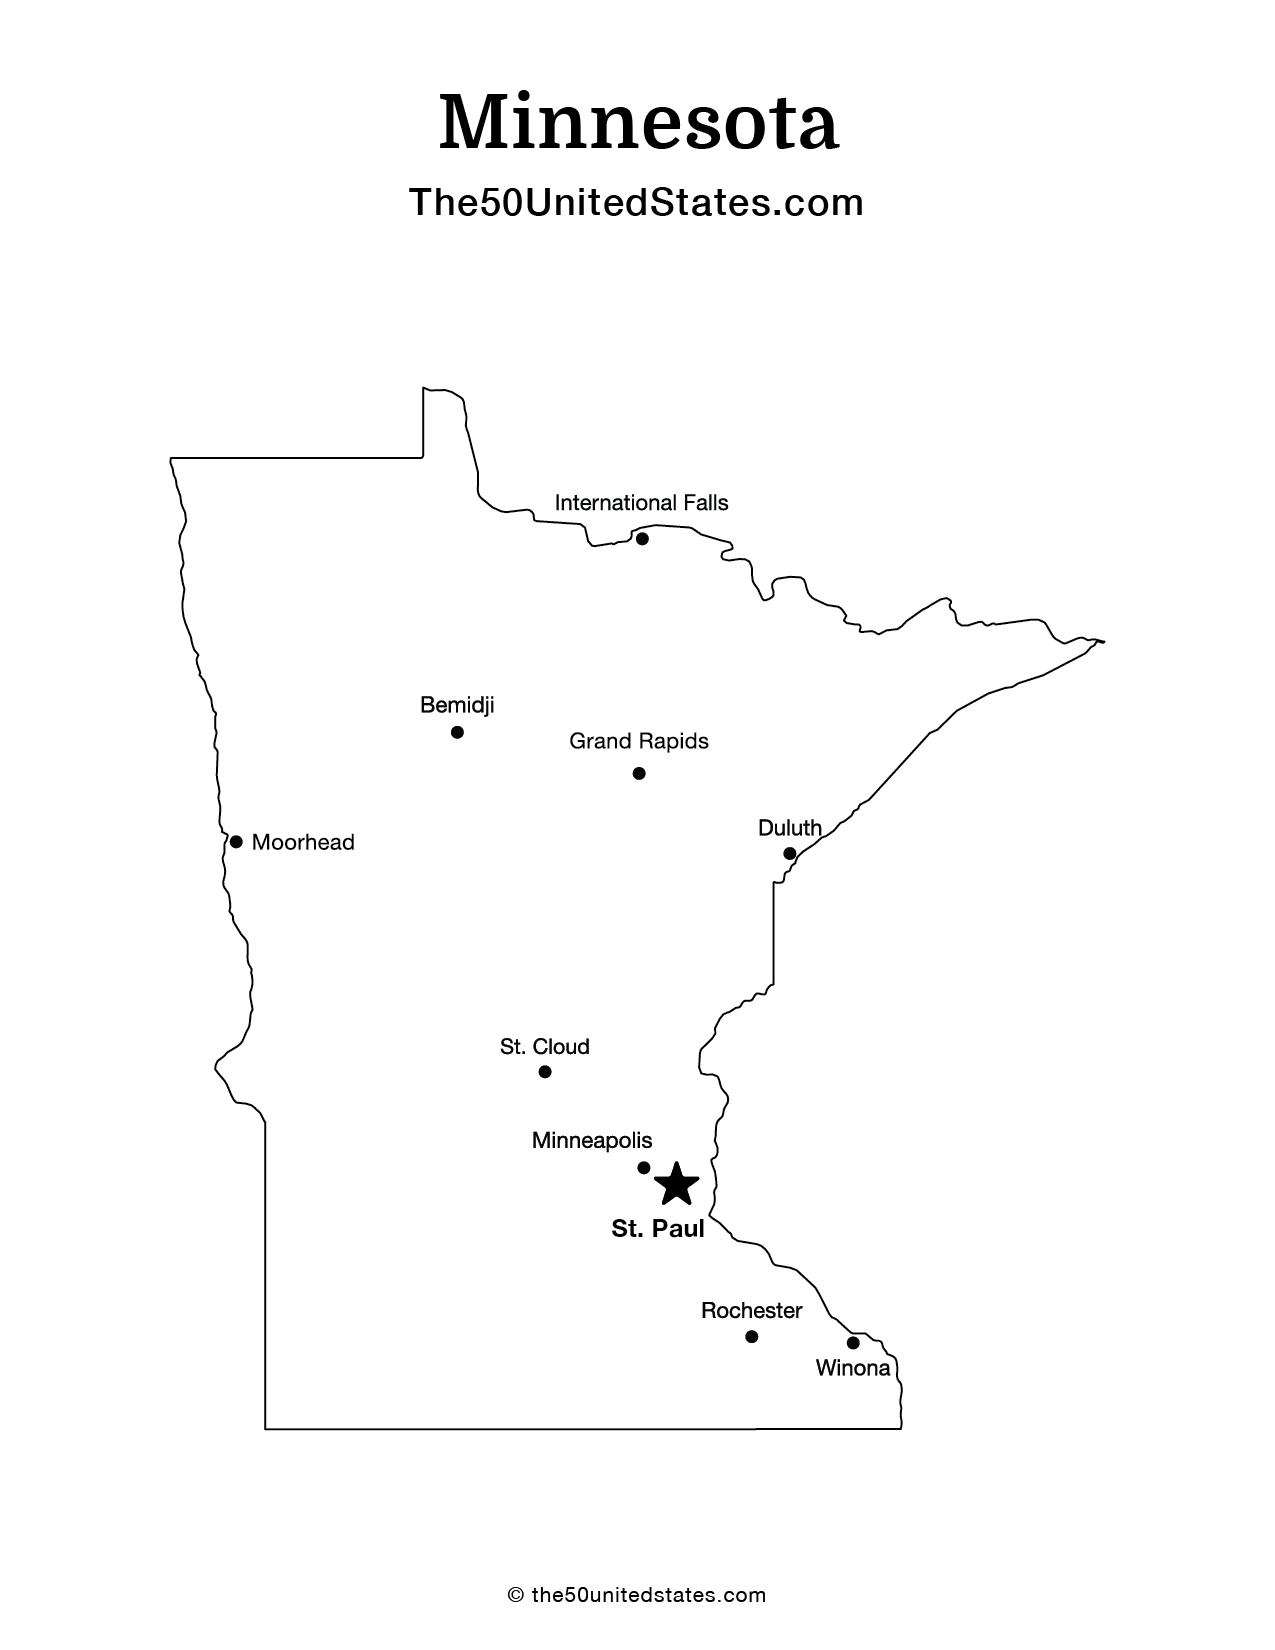 Map of Minnesota with Cities (Labeled)